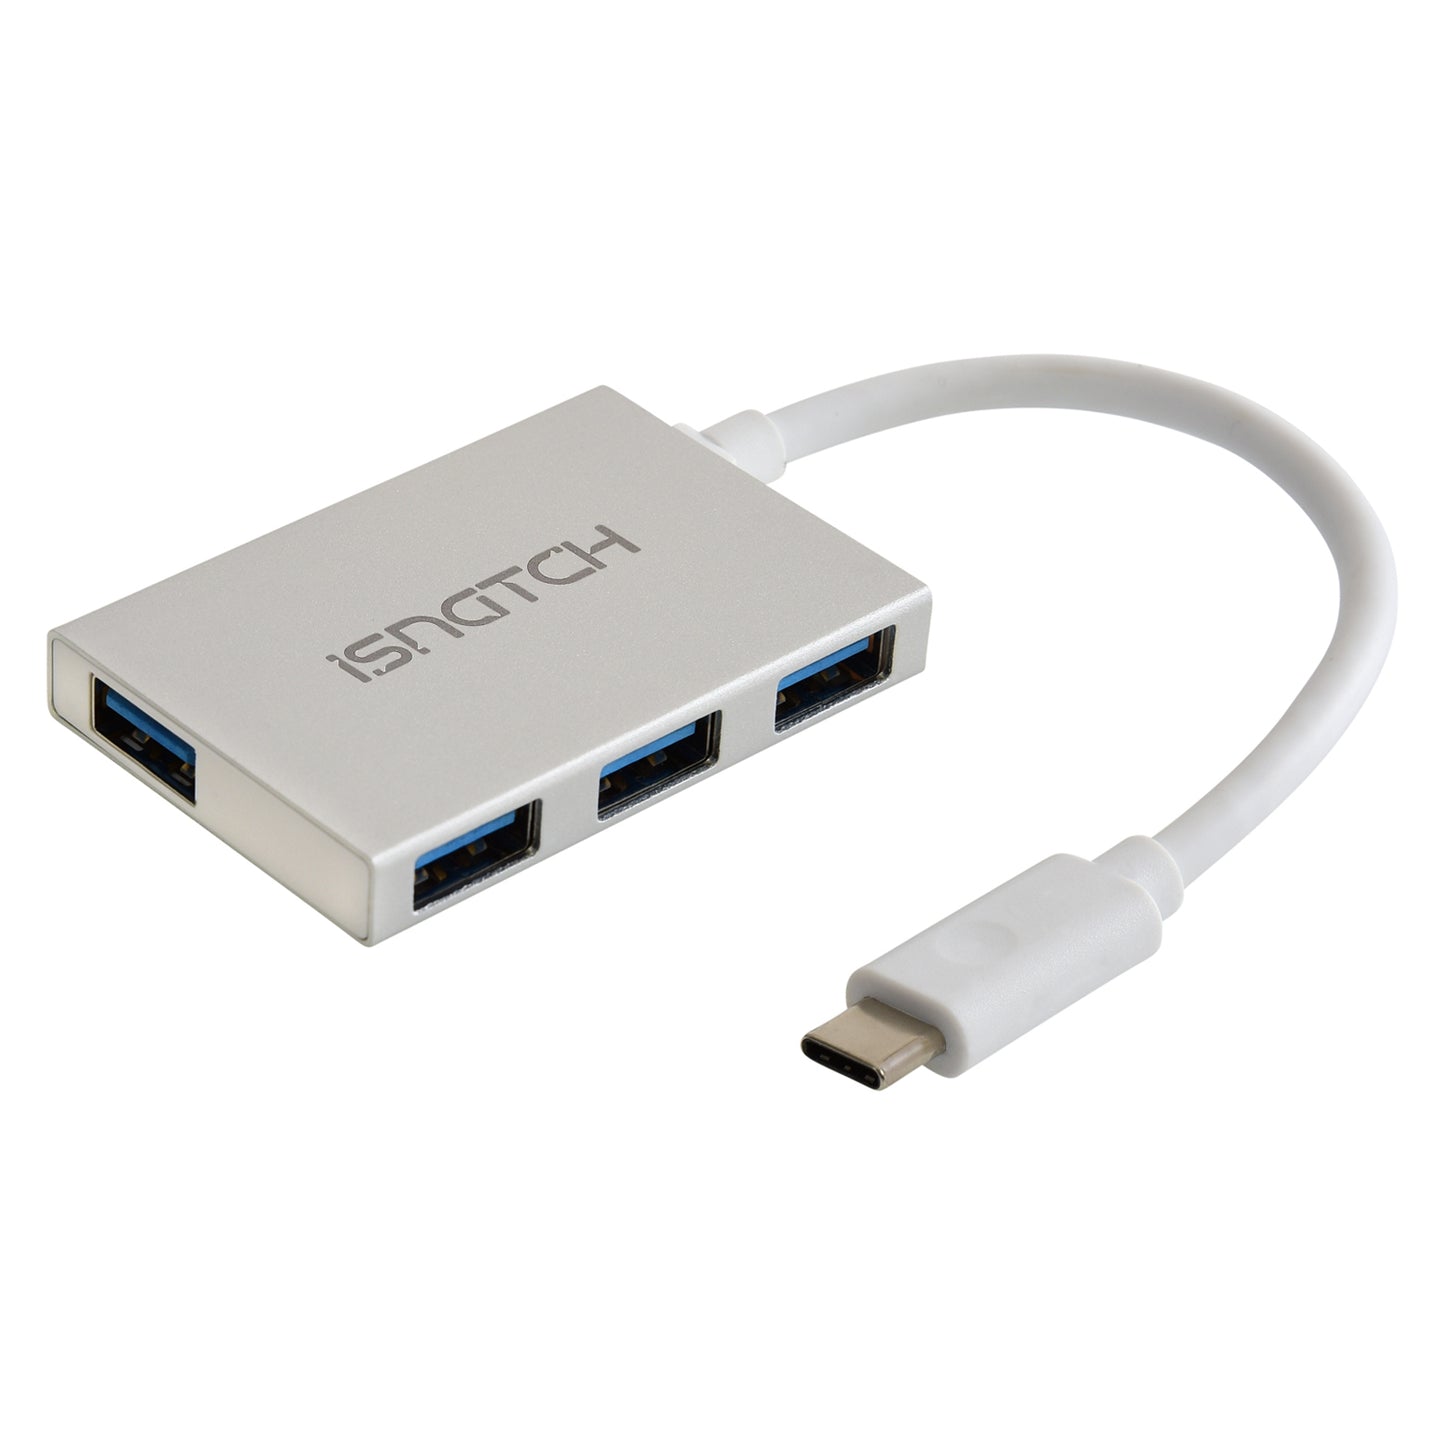 iSnatch Hub 4 USB 3.0 ports USB Type-C connector, 5Gbps speed, plug&amp;play, high-speed data transfer, no power required